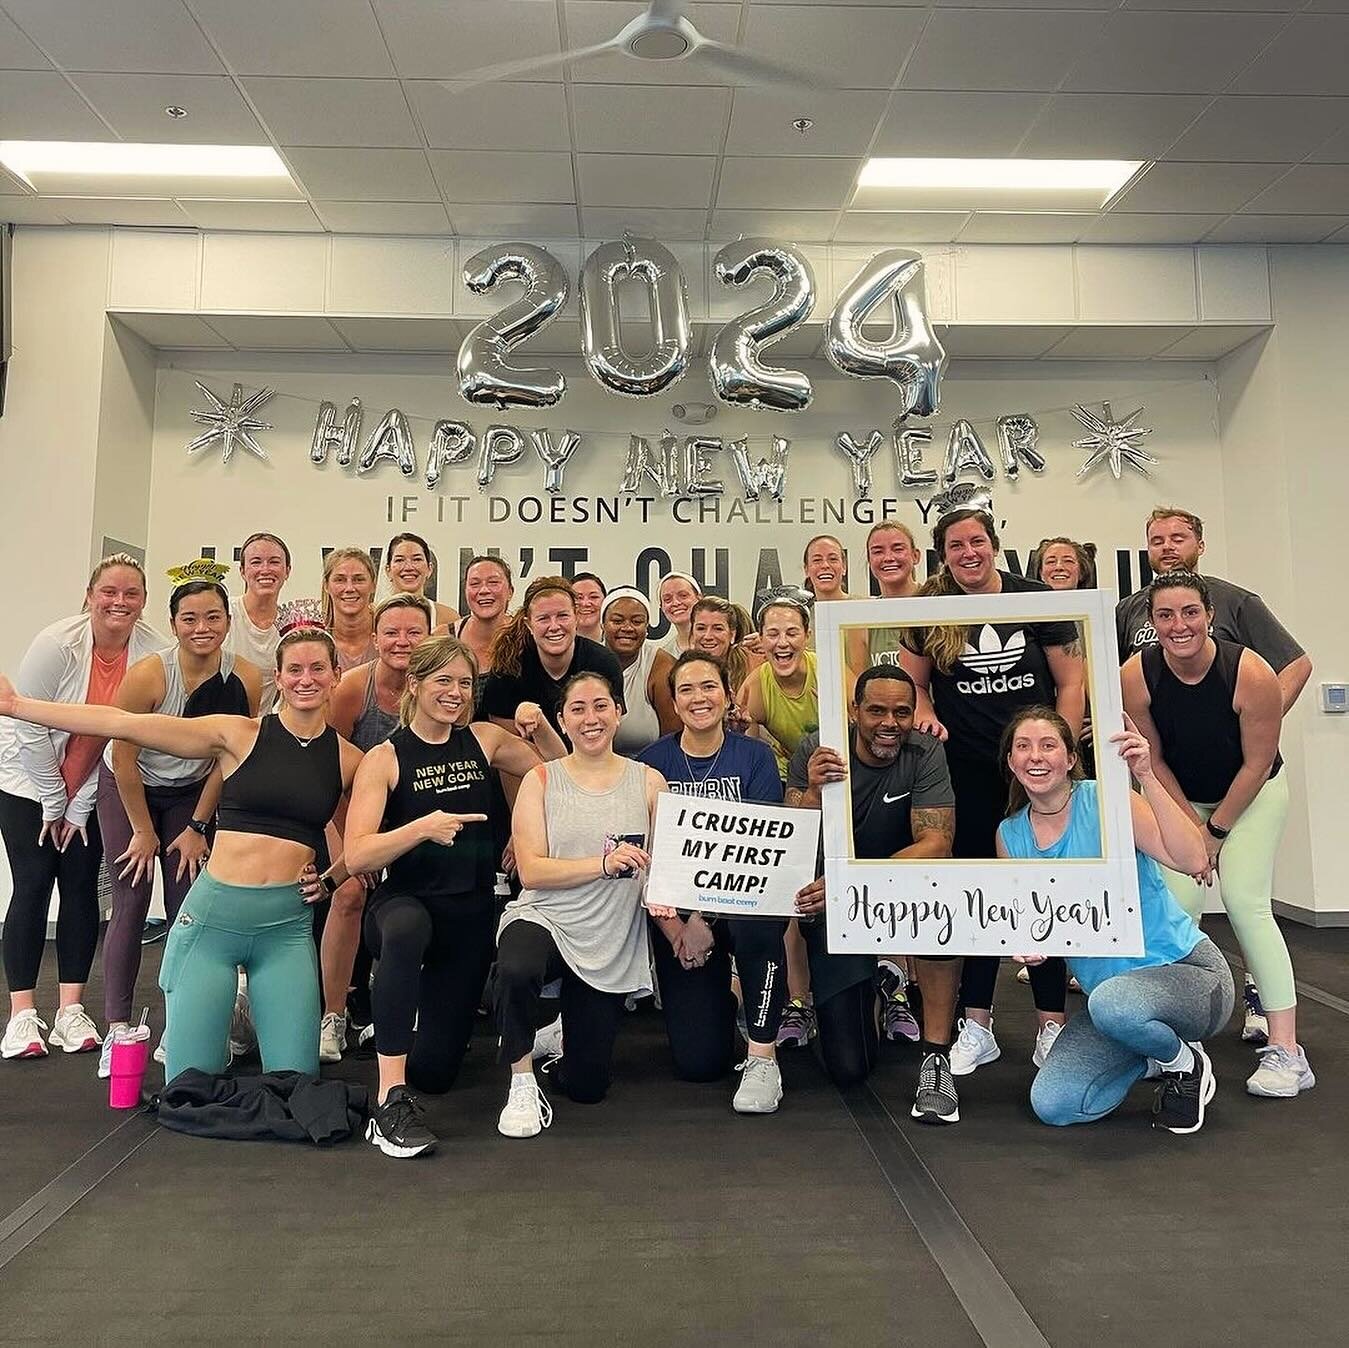 More than just a gym&hellip; a community 💙 @burnbootcamplibbiemillmidtown

New members still have a chance to take advantage of their 4 weeks for $69 promotion, but not for long! Burn offers challenging 45-minute workouts focusing on different types